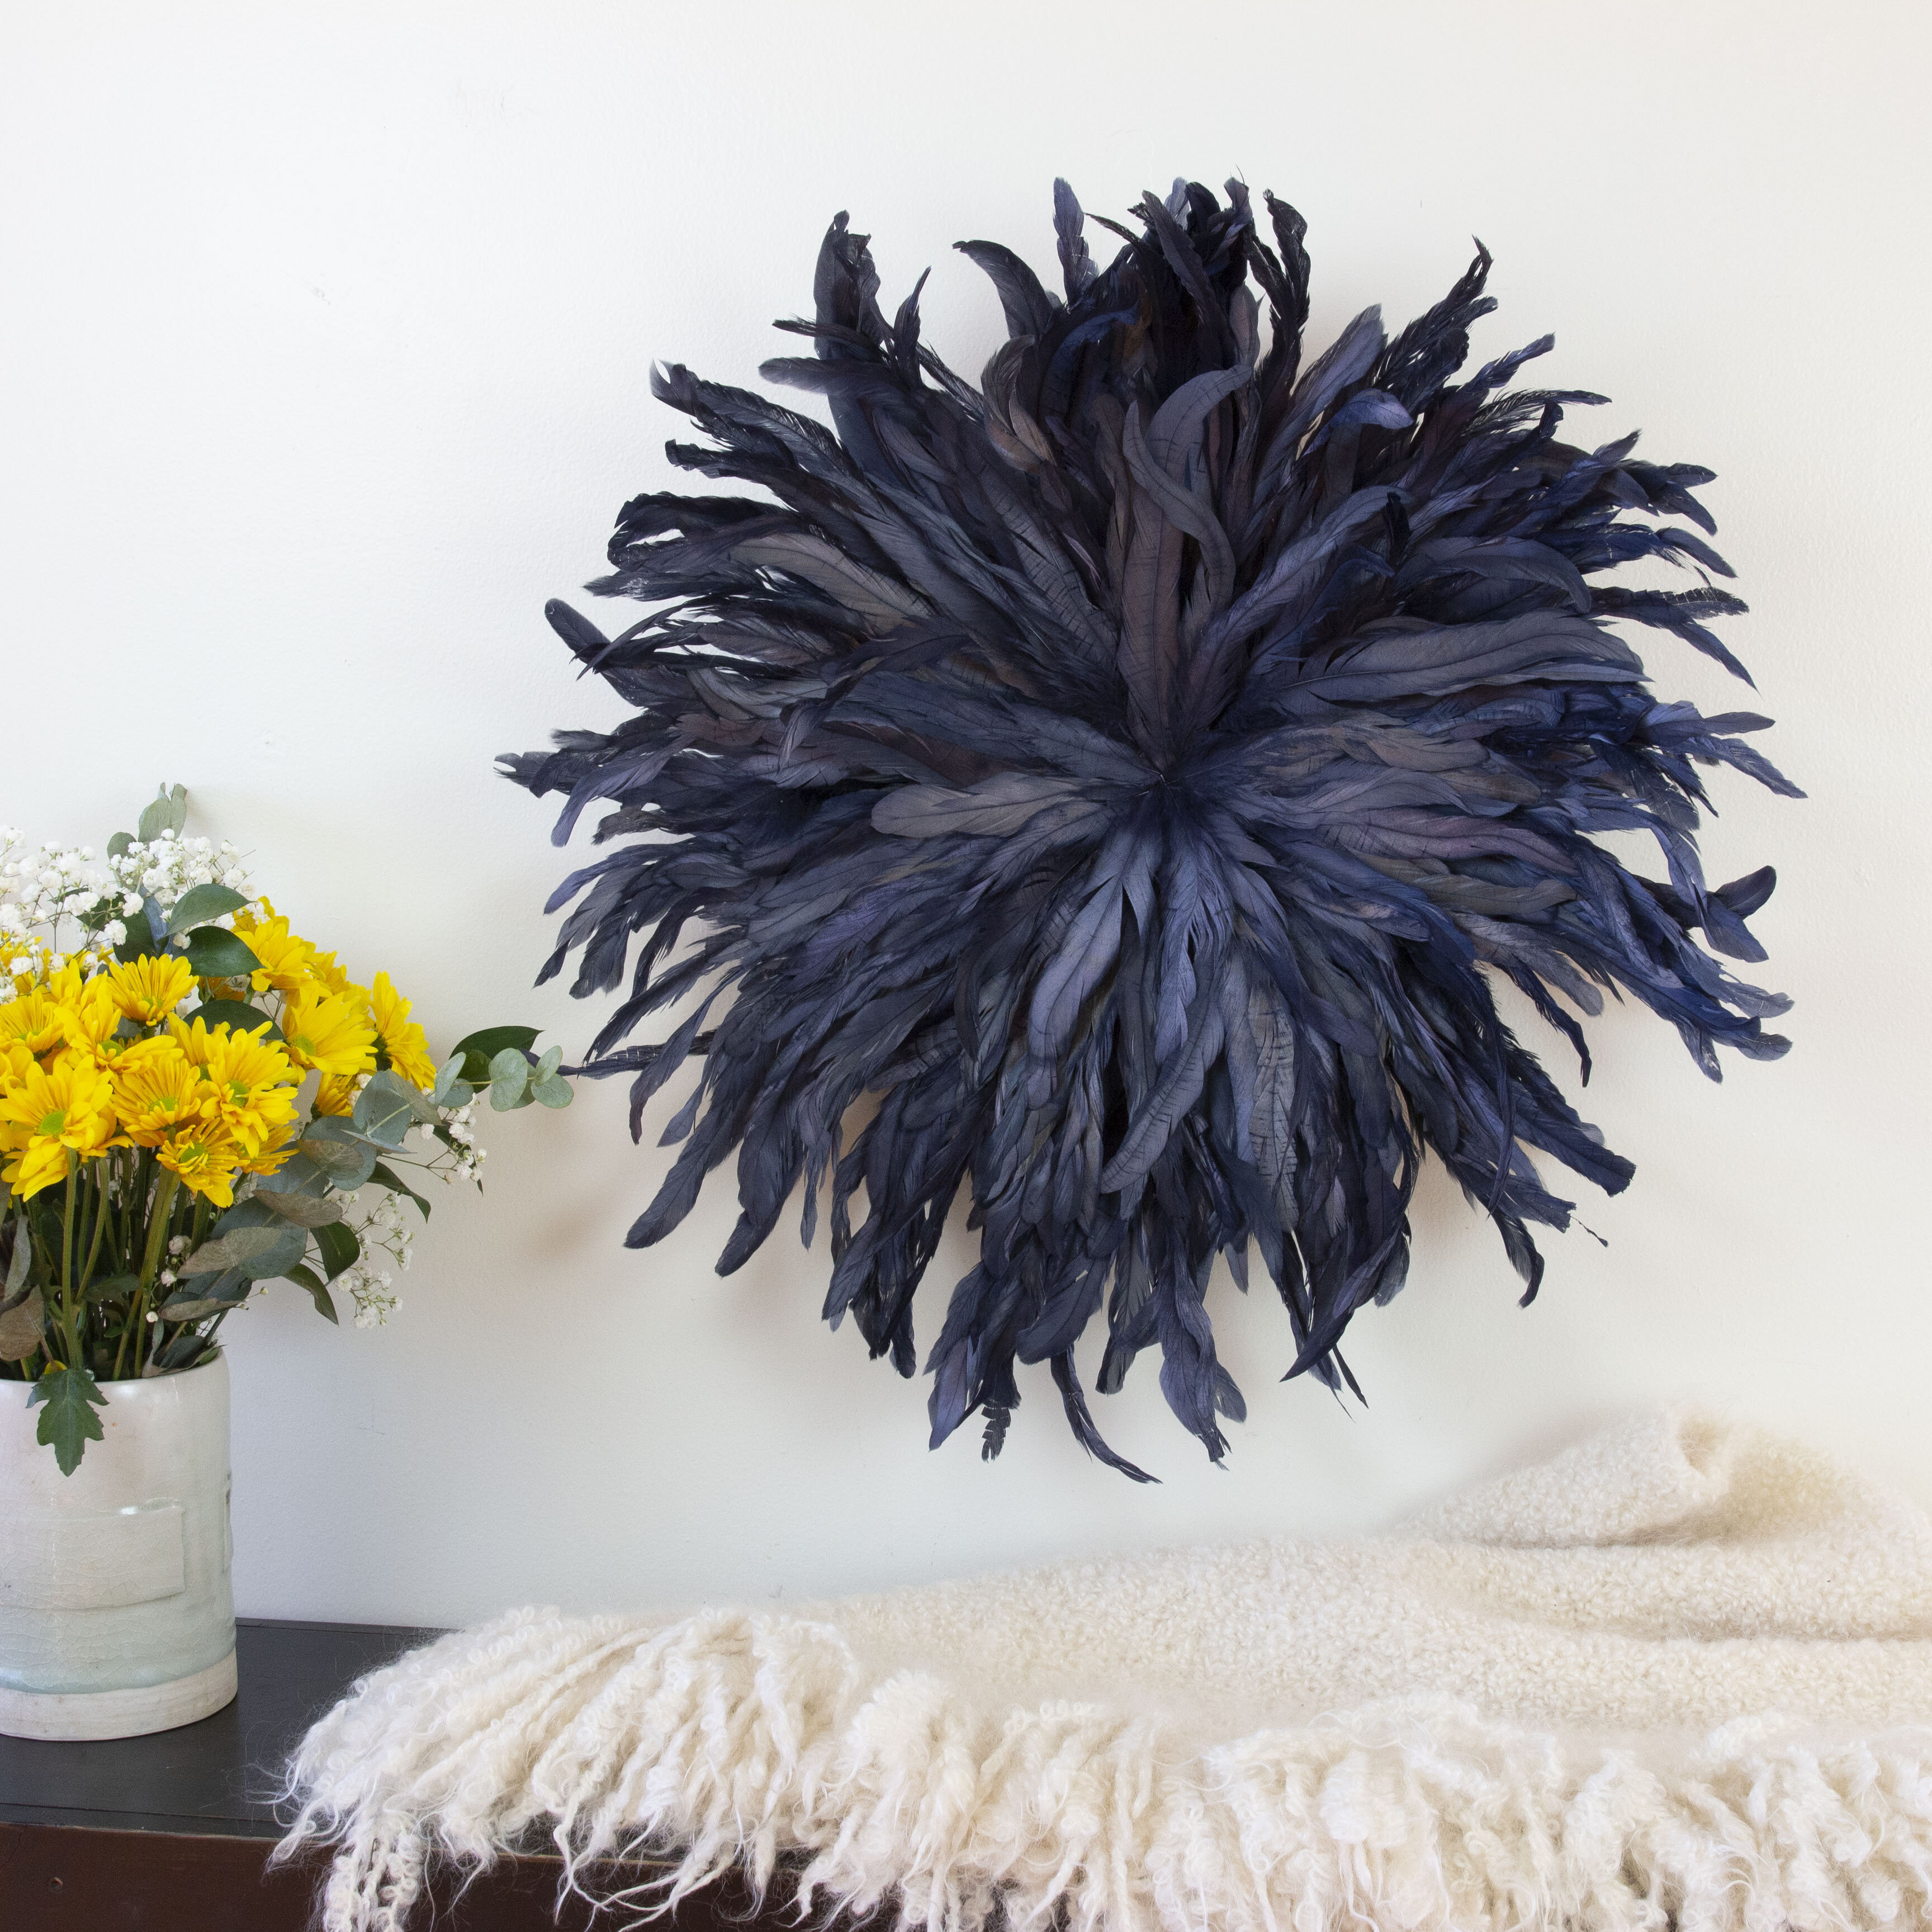 Hat 'feathers', Dried Flowers and Feather Accent for Hat, Feathers